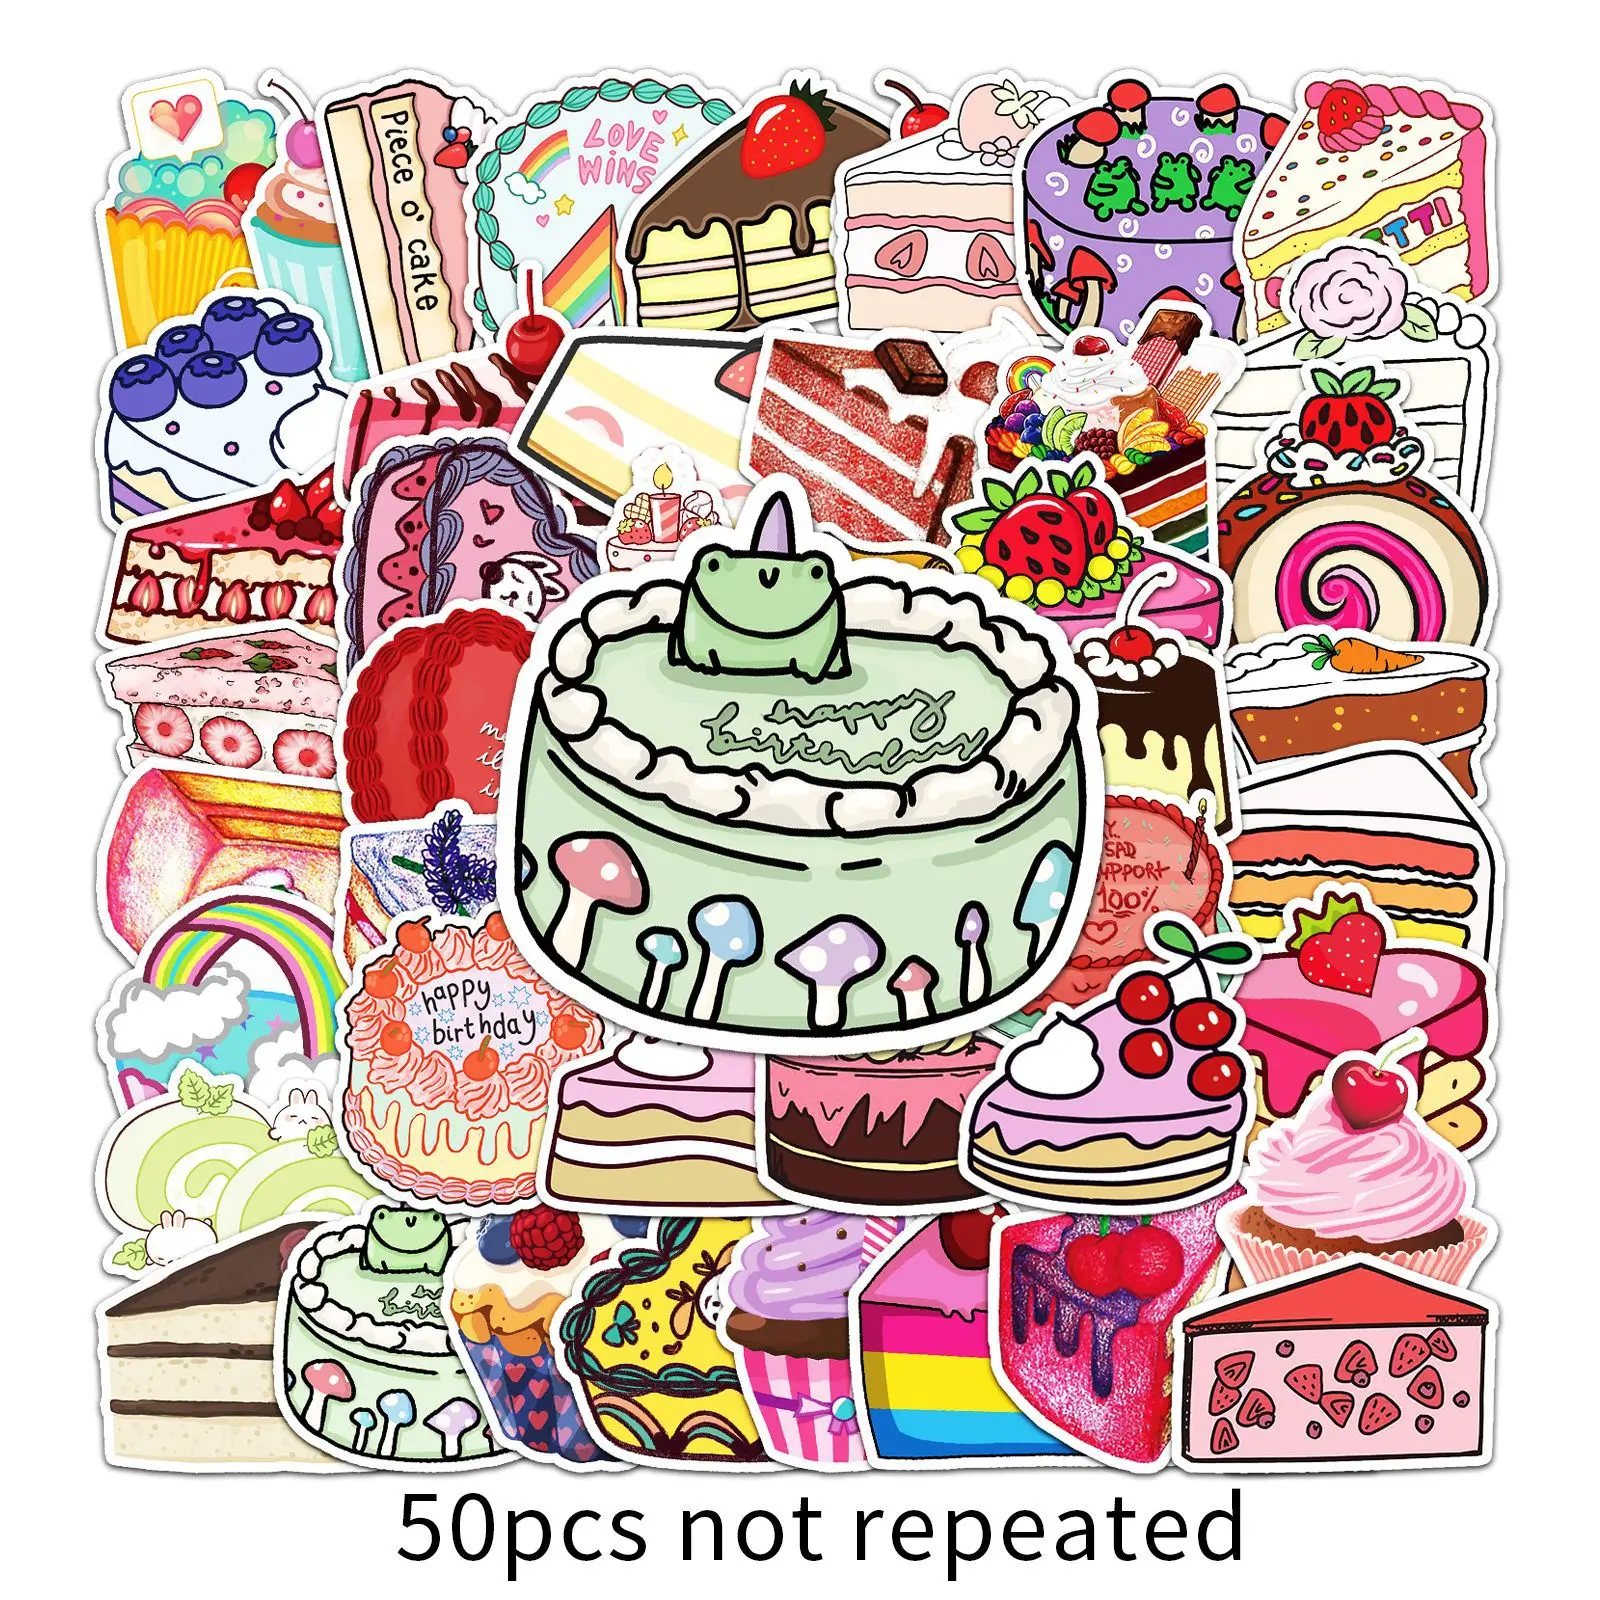 

50pcs Lovely Cake Food Stickers Birthday Party Gift Graffiti Daily Life Delicious Sweets Luggage Window Wall Water